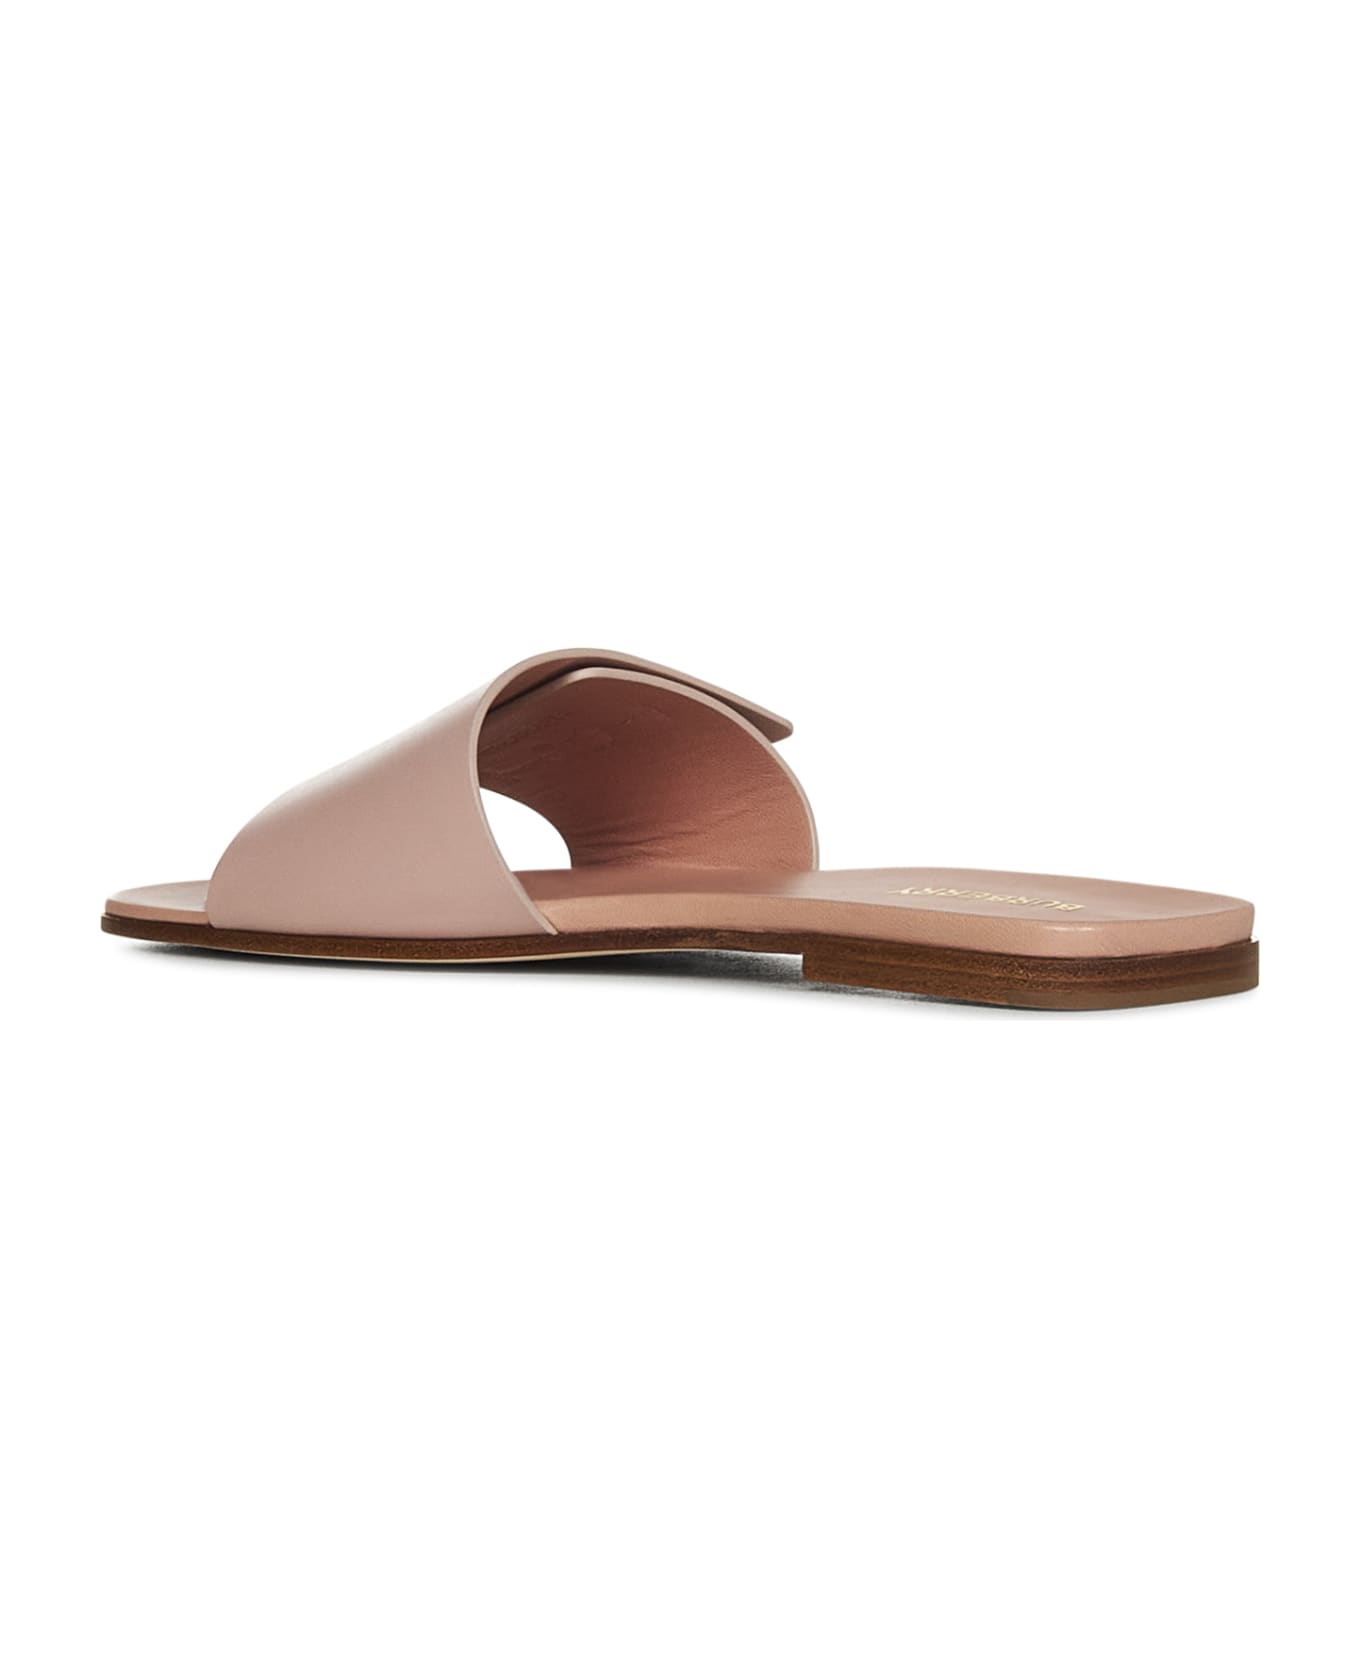 Burberry Powder Pink Leather Slippers - Pink